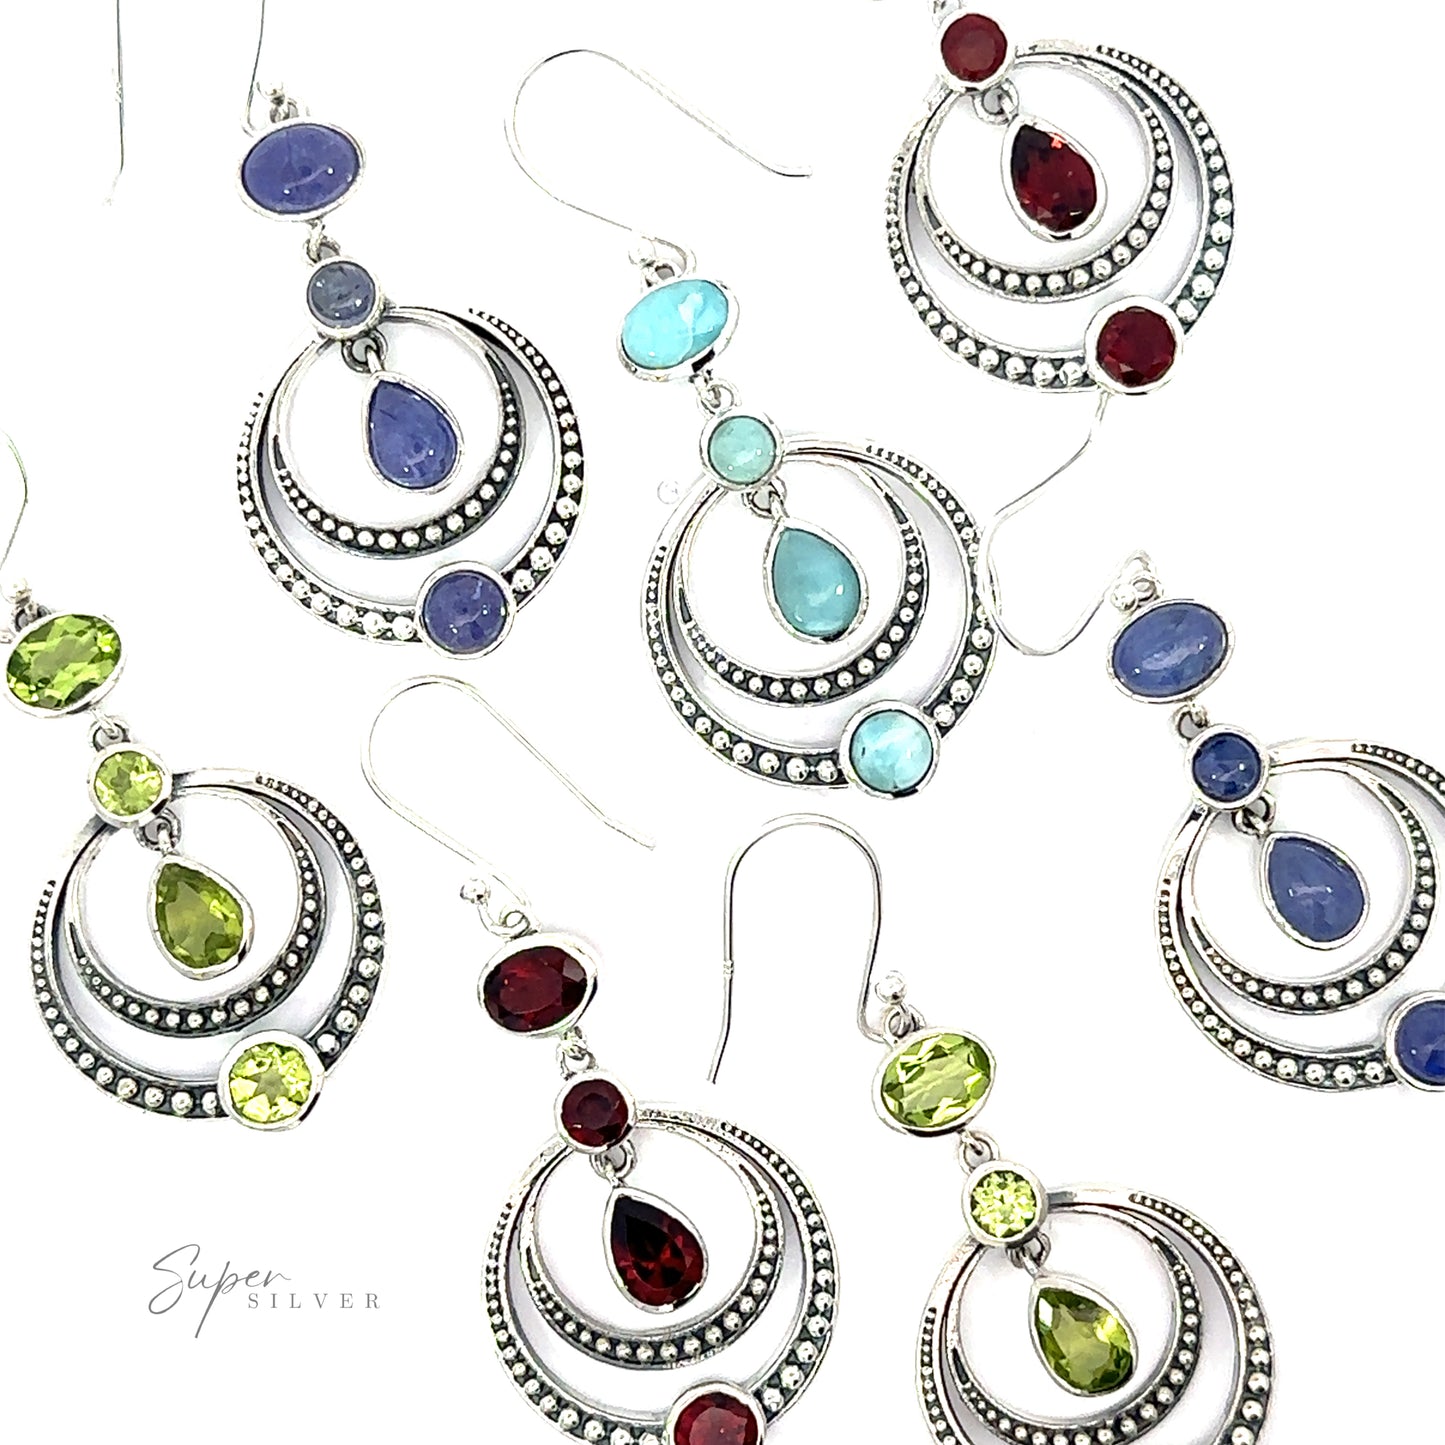 A collection of Overlapping Circle Earrings with Vibrant Gemstones featuring various colored gemstones and intricate .925 Sterling Silver designs, displayed on a white background.